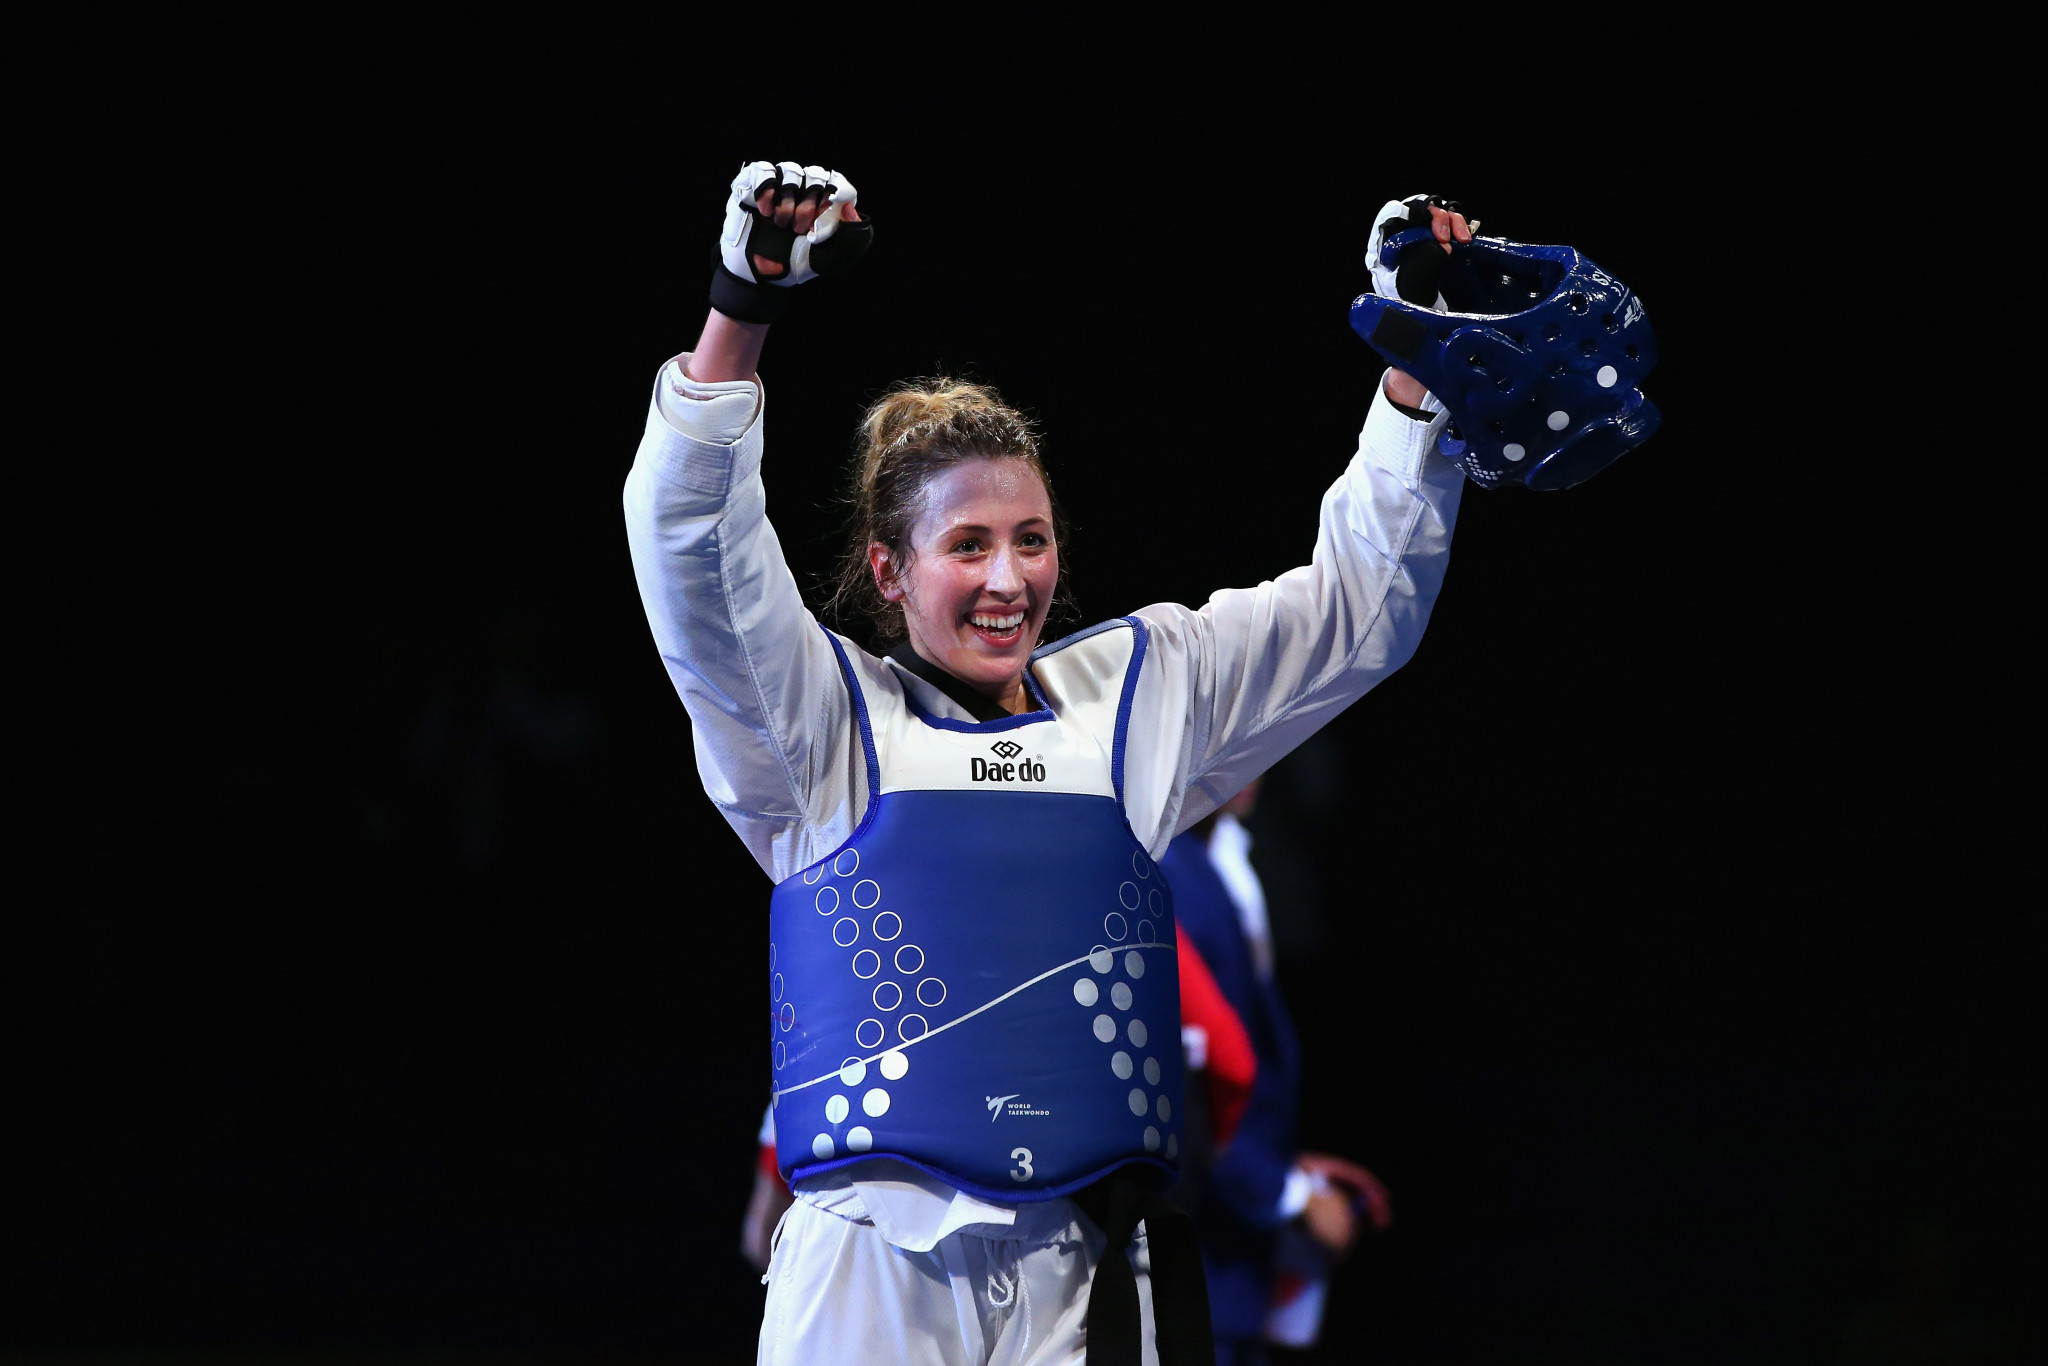 Double Olympic champion Jade Jones upset the Chinese crowd with victory over home favourite Zongshi Luo at the World Taekwondo Grand Slam Champions Series in Wuxi ©Getty Images